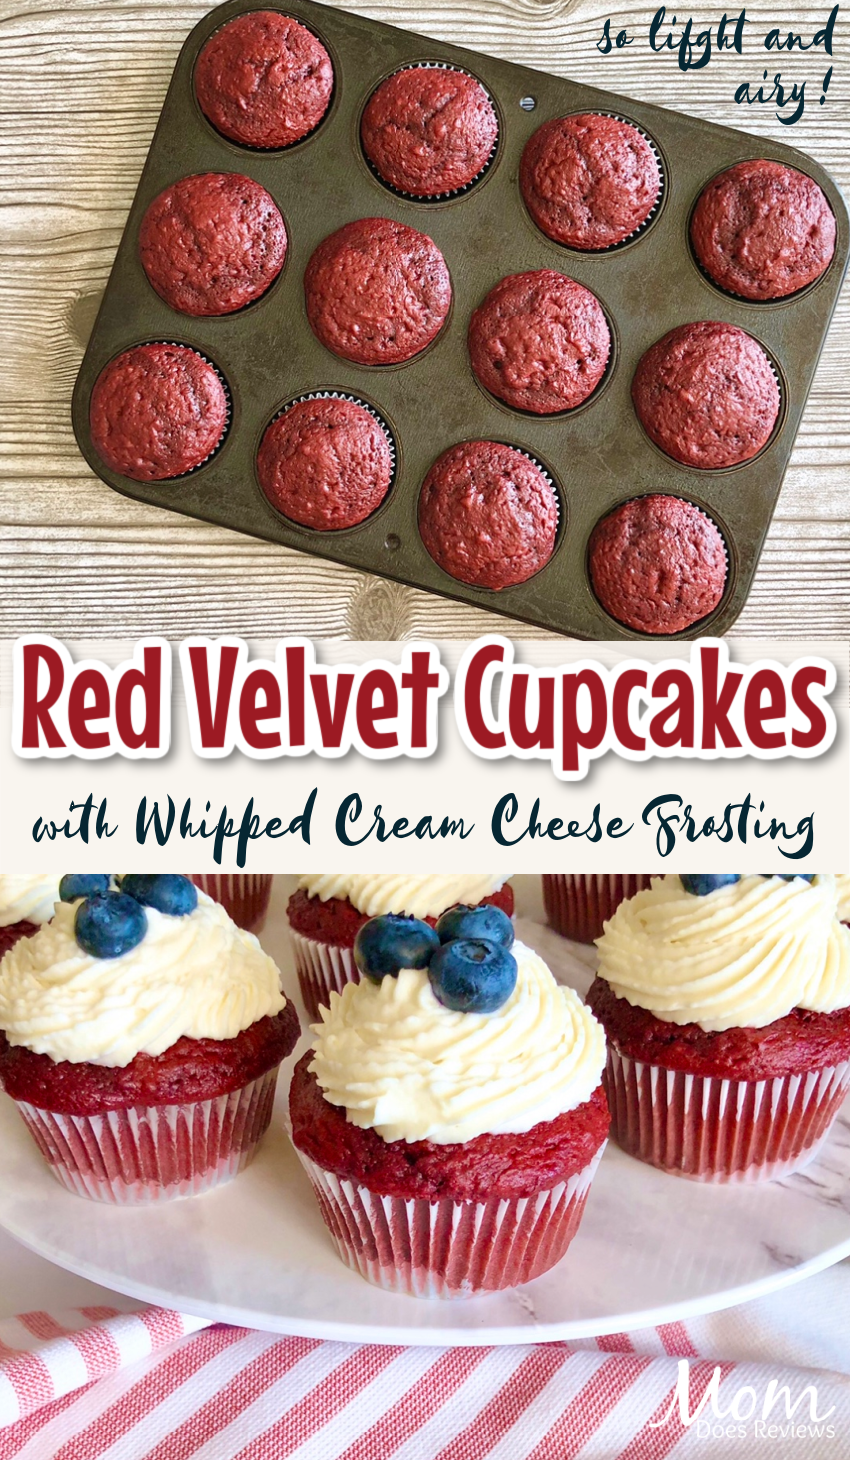 Red Velvet Cupcakes with Homemade Whipped Cream Cheese Frosting #cupcakes #sweets #creamcheesefrosting #recipe